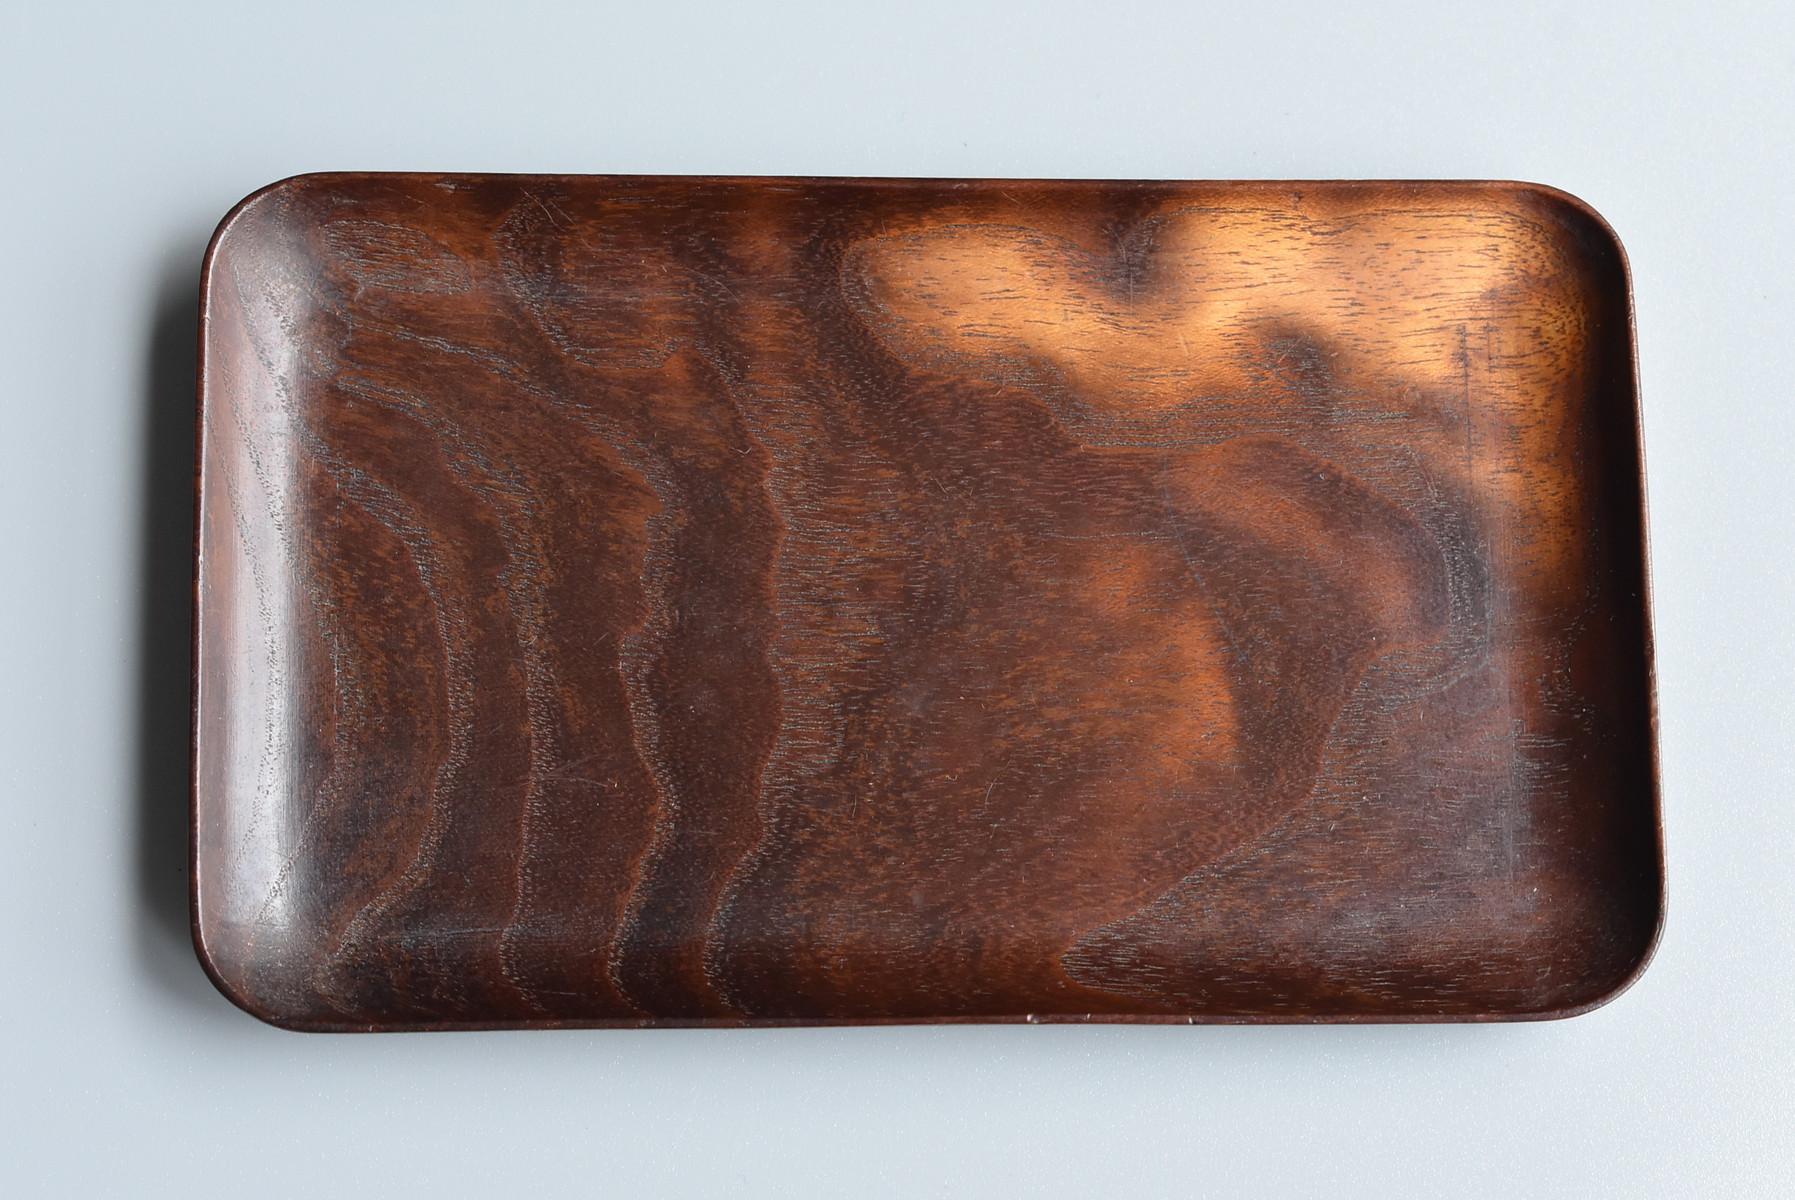 Japanese old mulberry

Thin little tray made of / shop card holder / tea tray



A small tray made from old Japanese mulberry wood.

Mulberry is a high-class wood that has been widely used in traditional Japanese woodwork.
It is often used